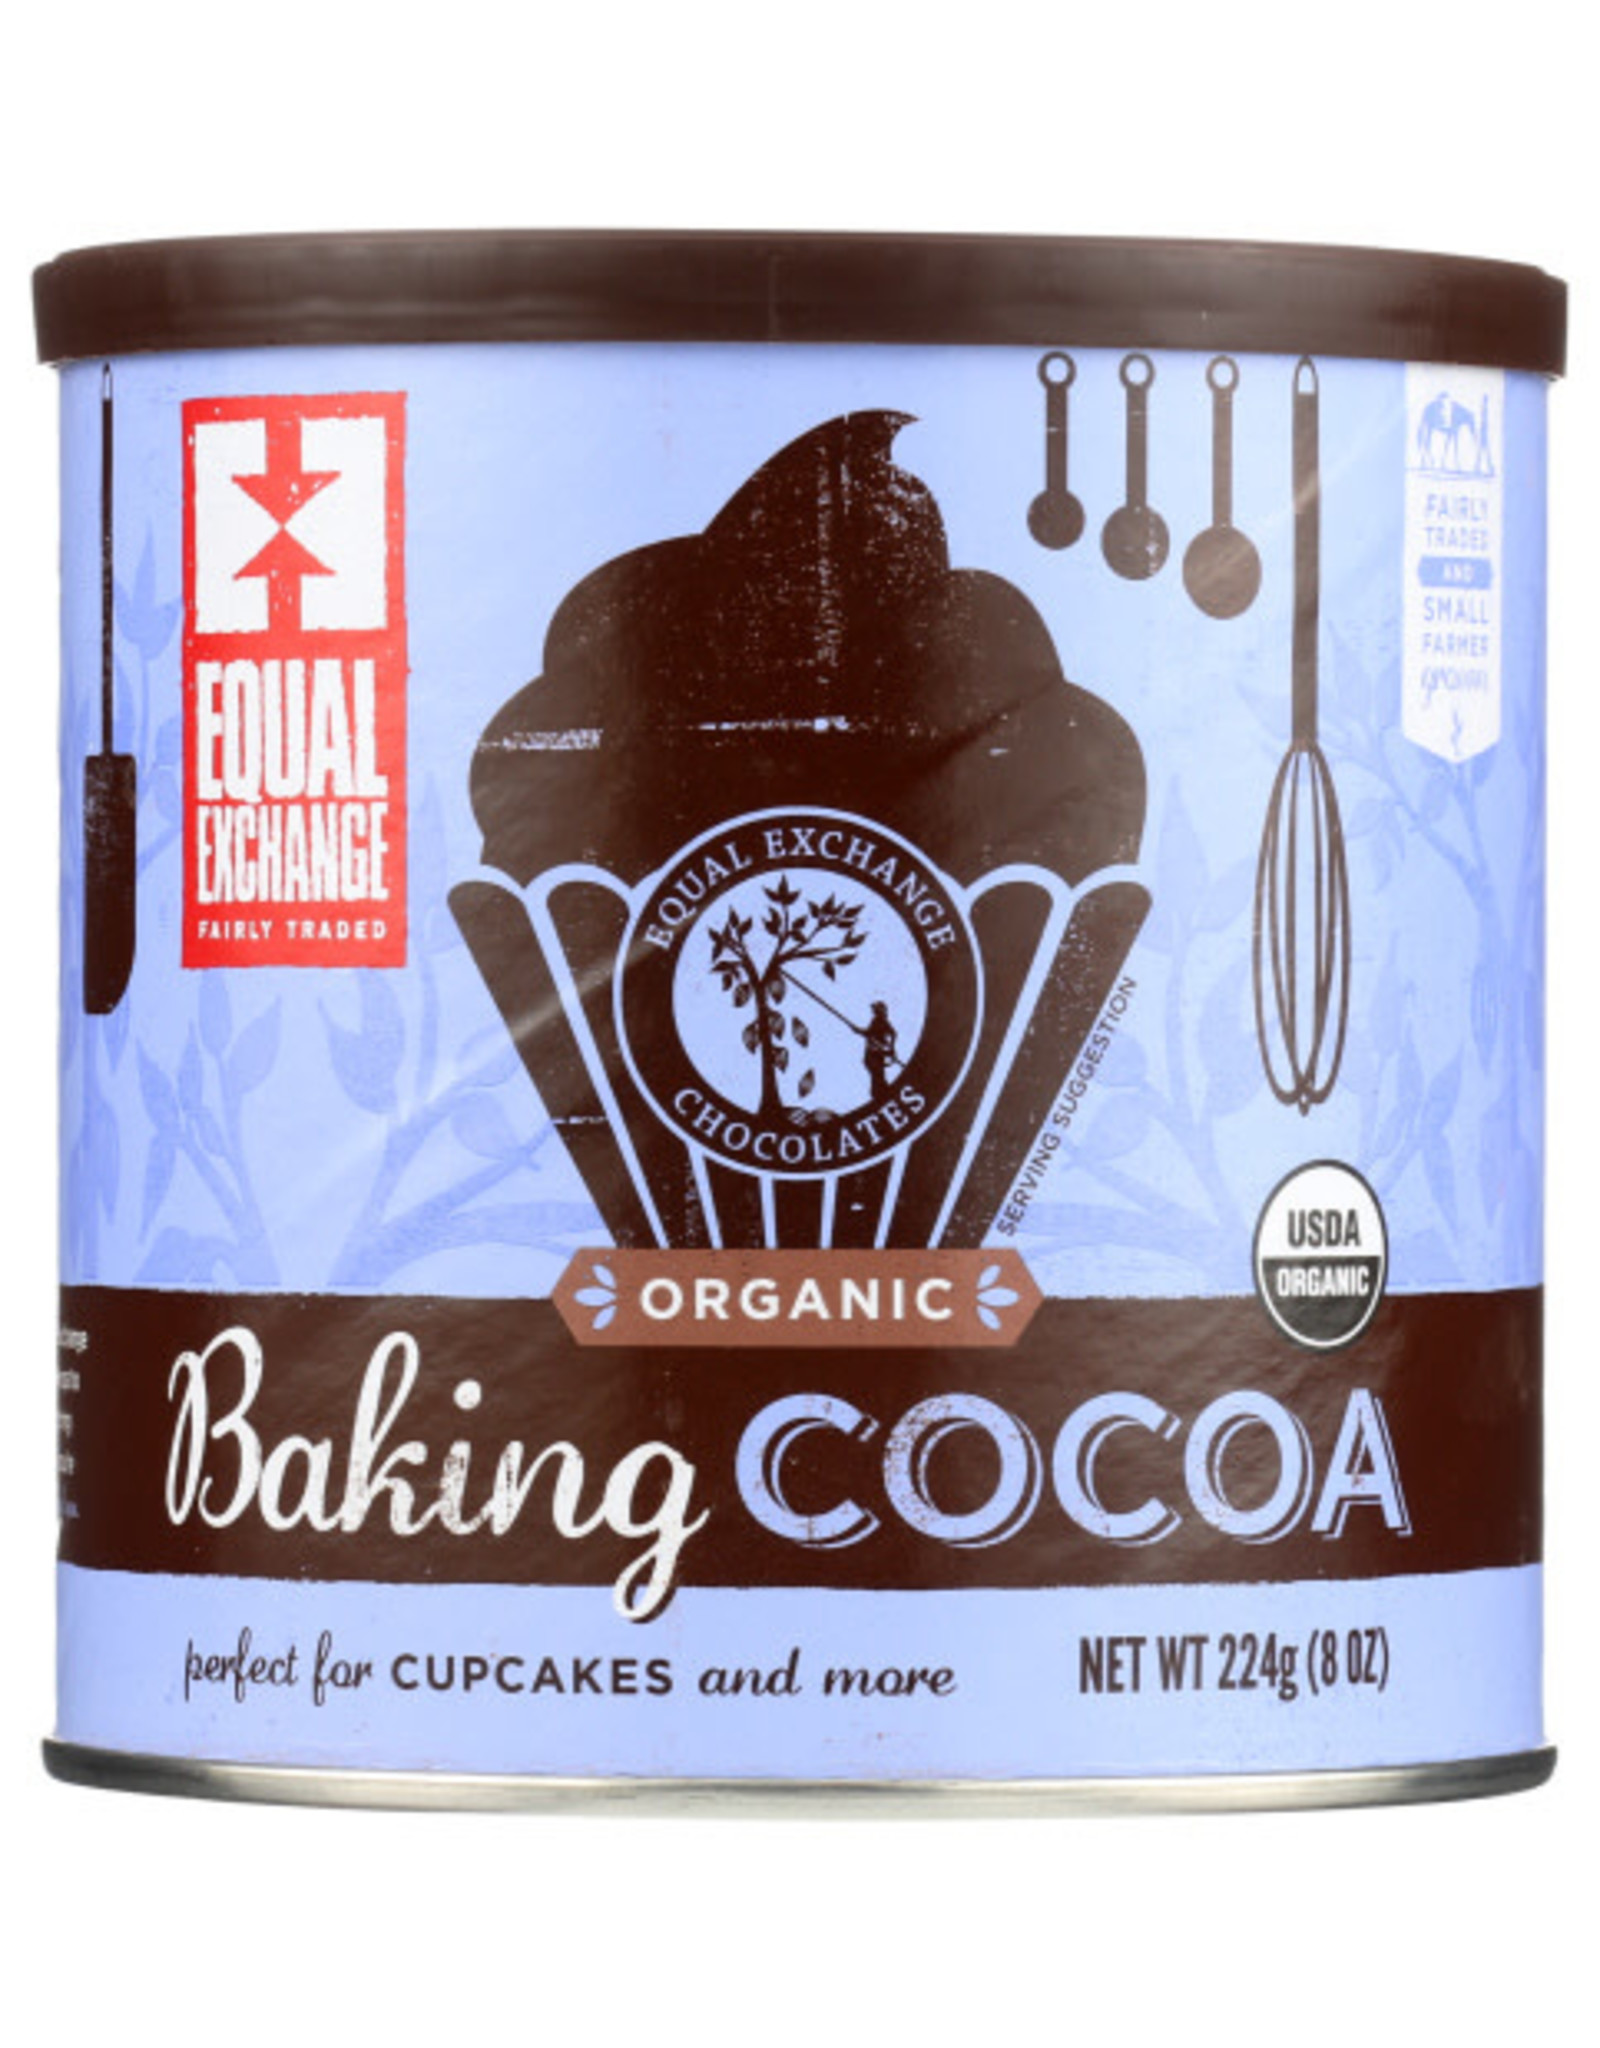 EQUAL EXCHANGE EQUAL EXCHANGE AUTHENTIC FAIR TRADE COCOA, BAKING COCOA, 224 G.